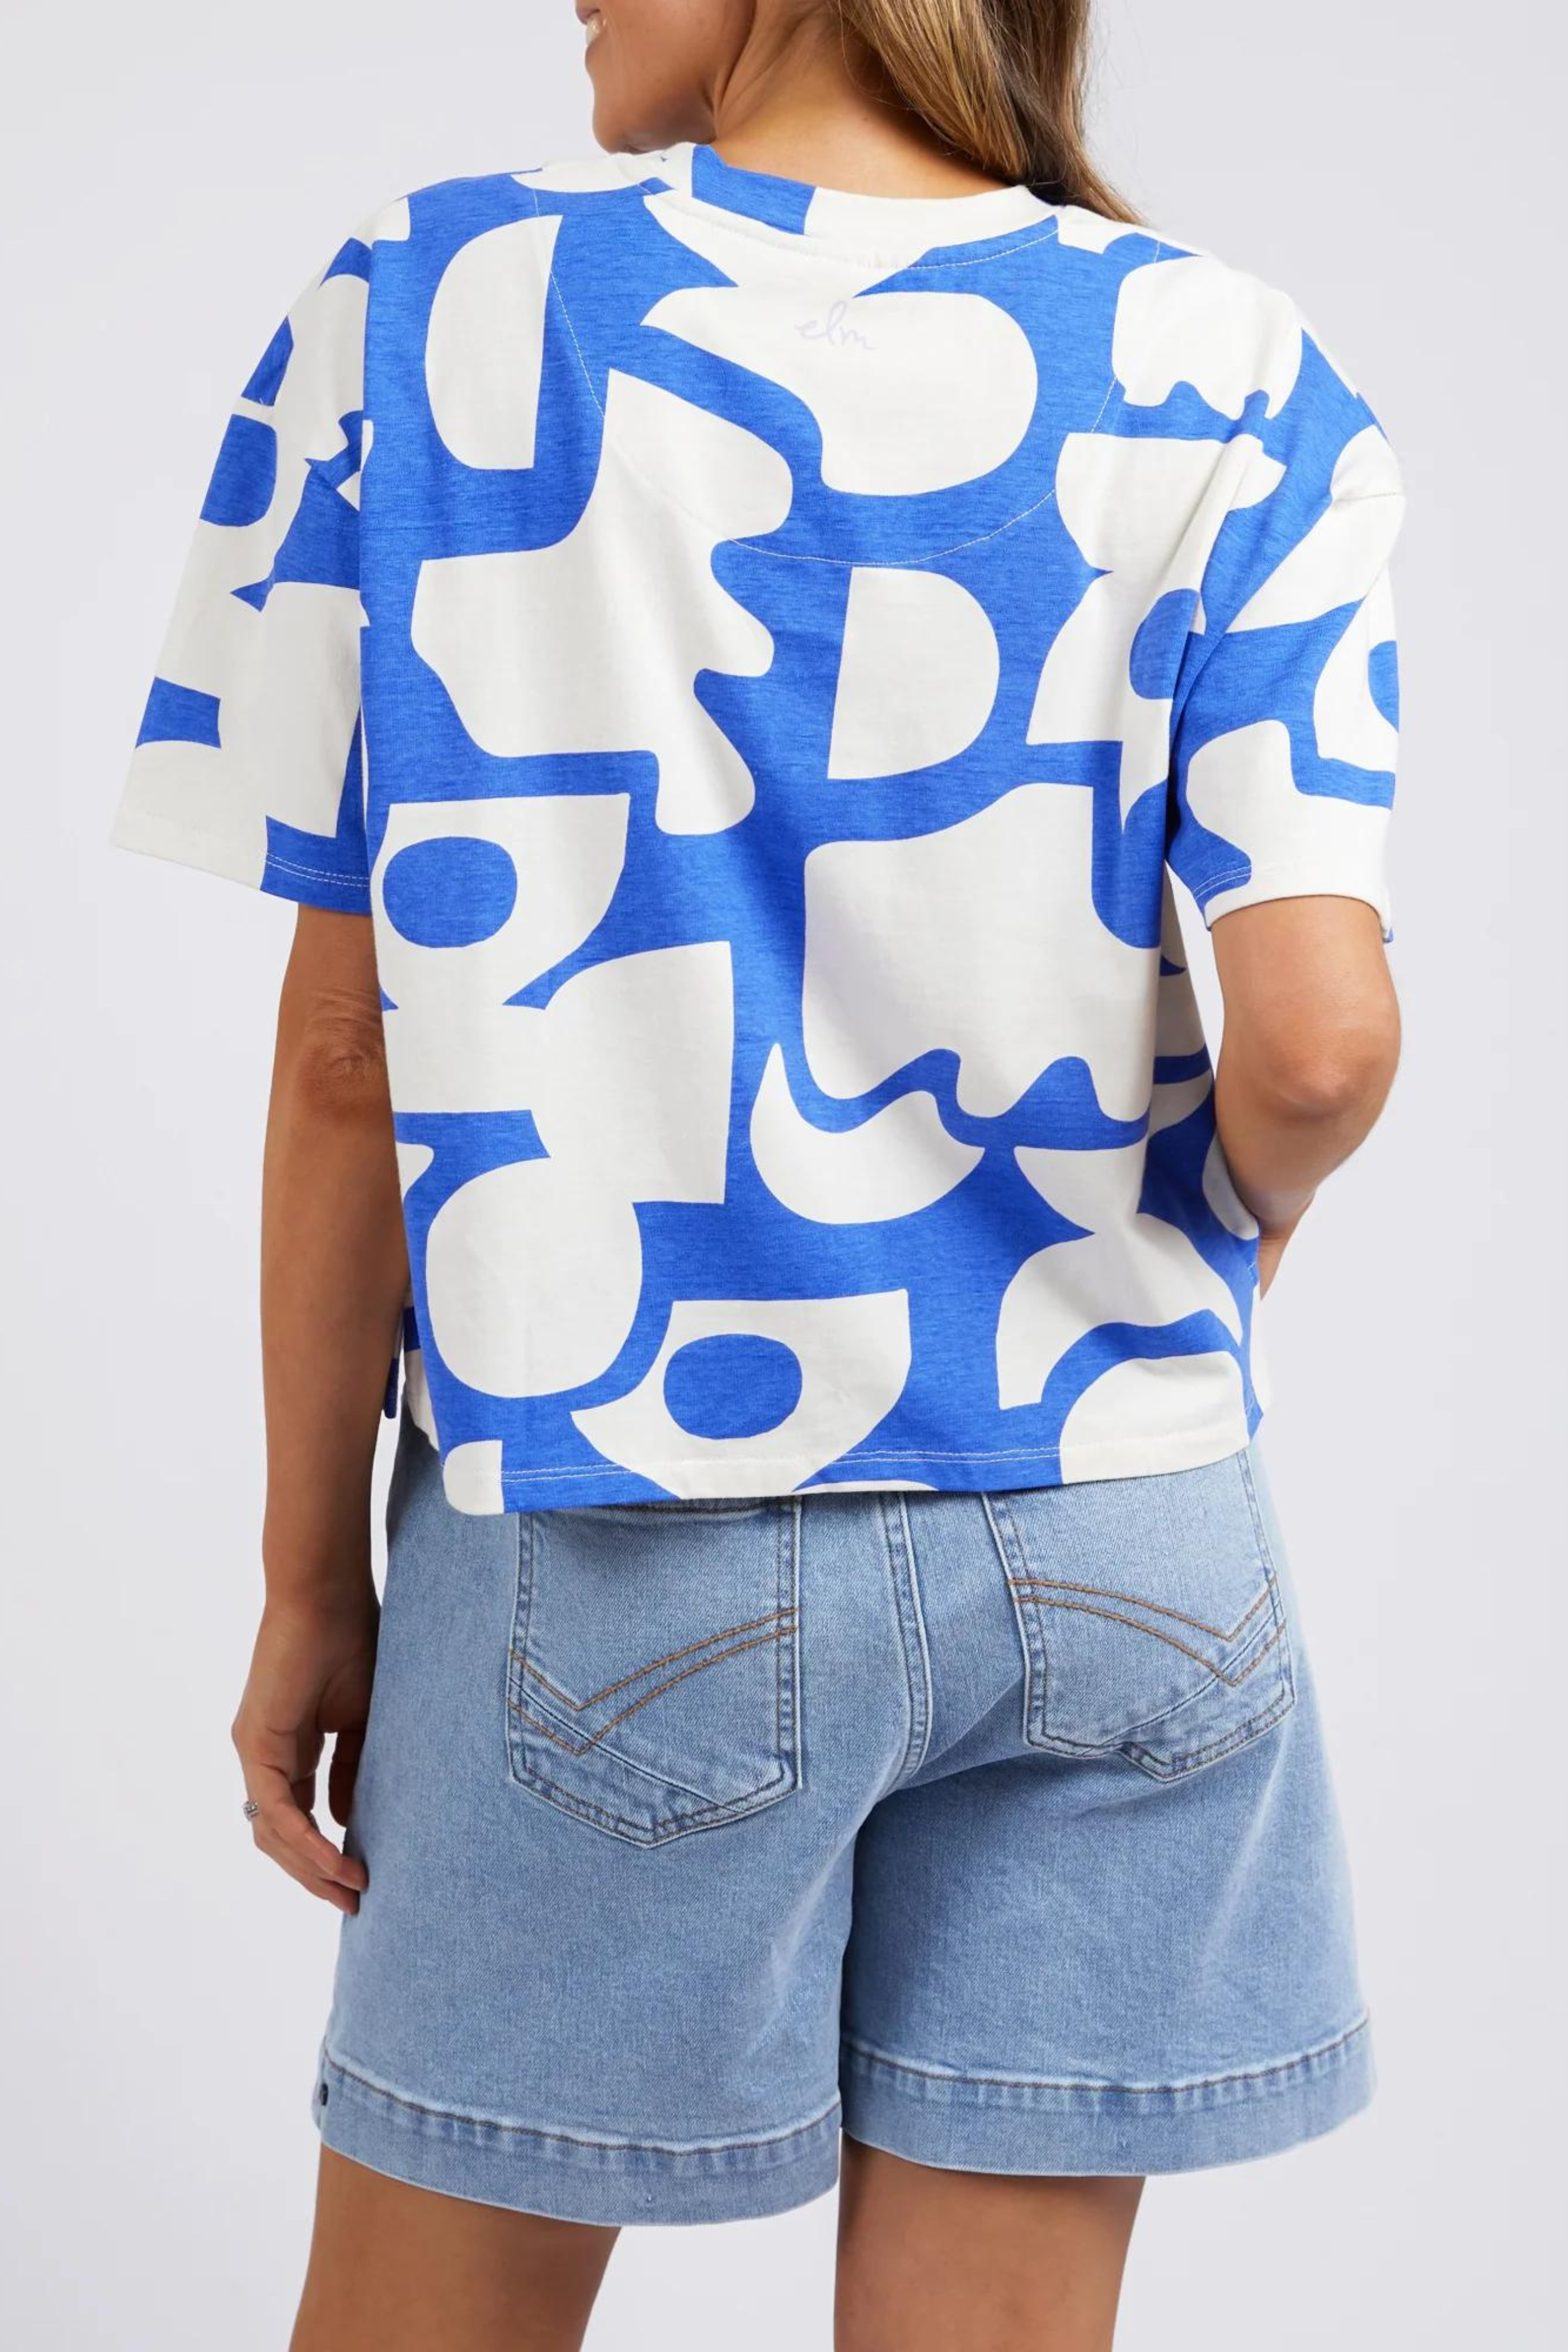 Miro Tee in Blue and White